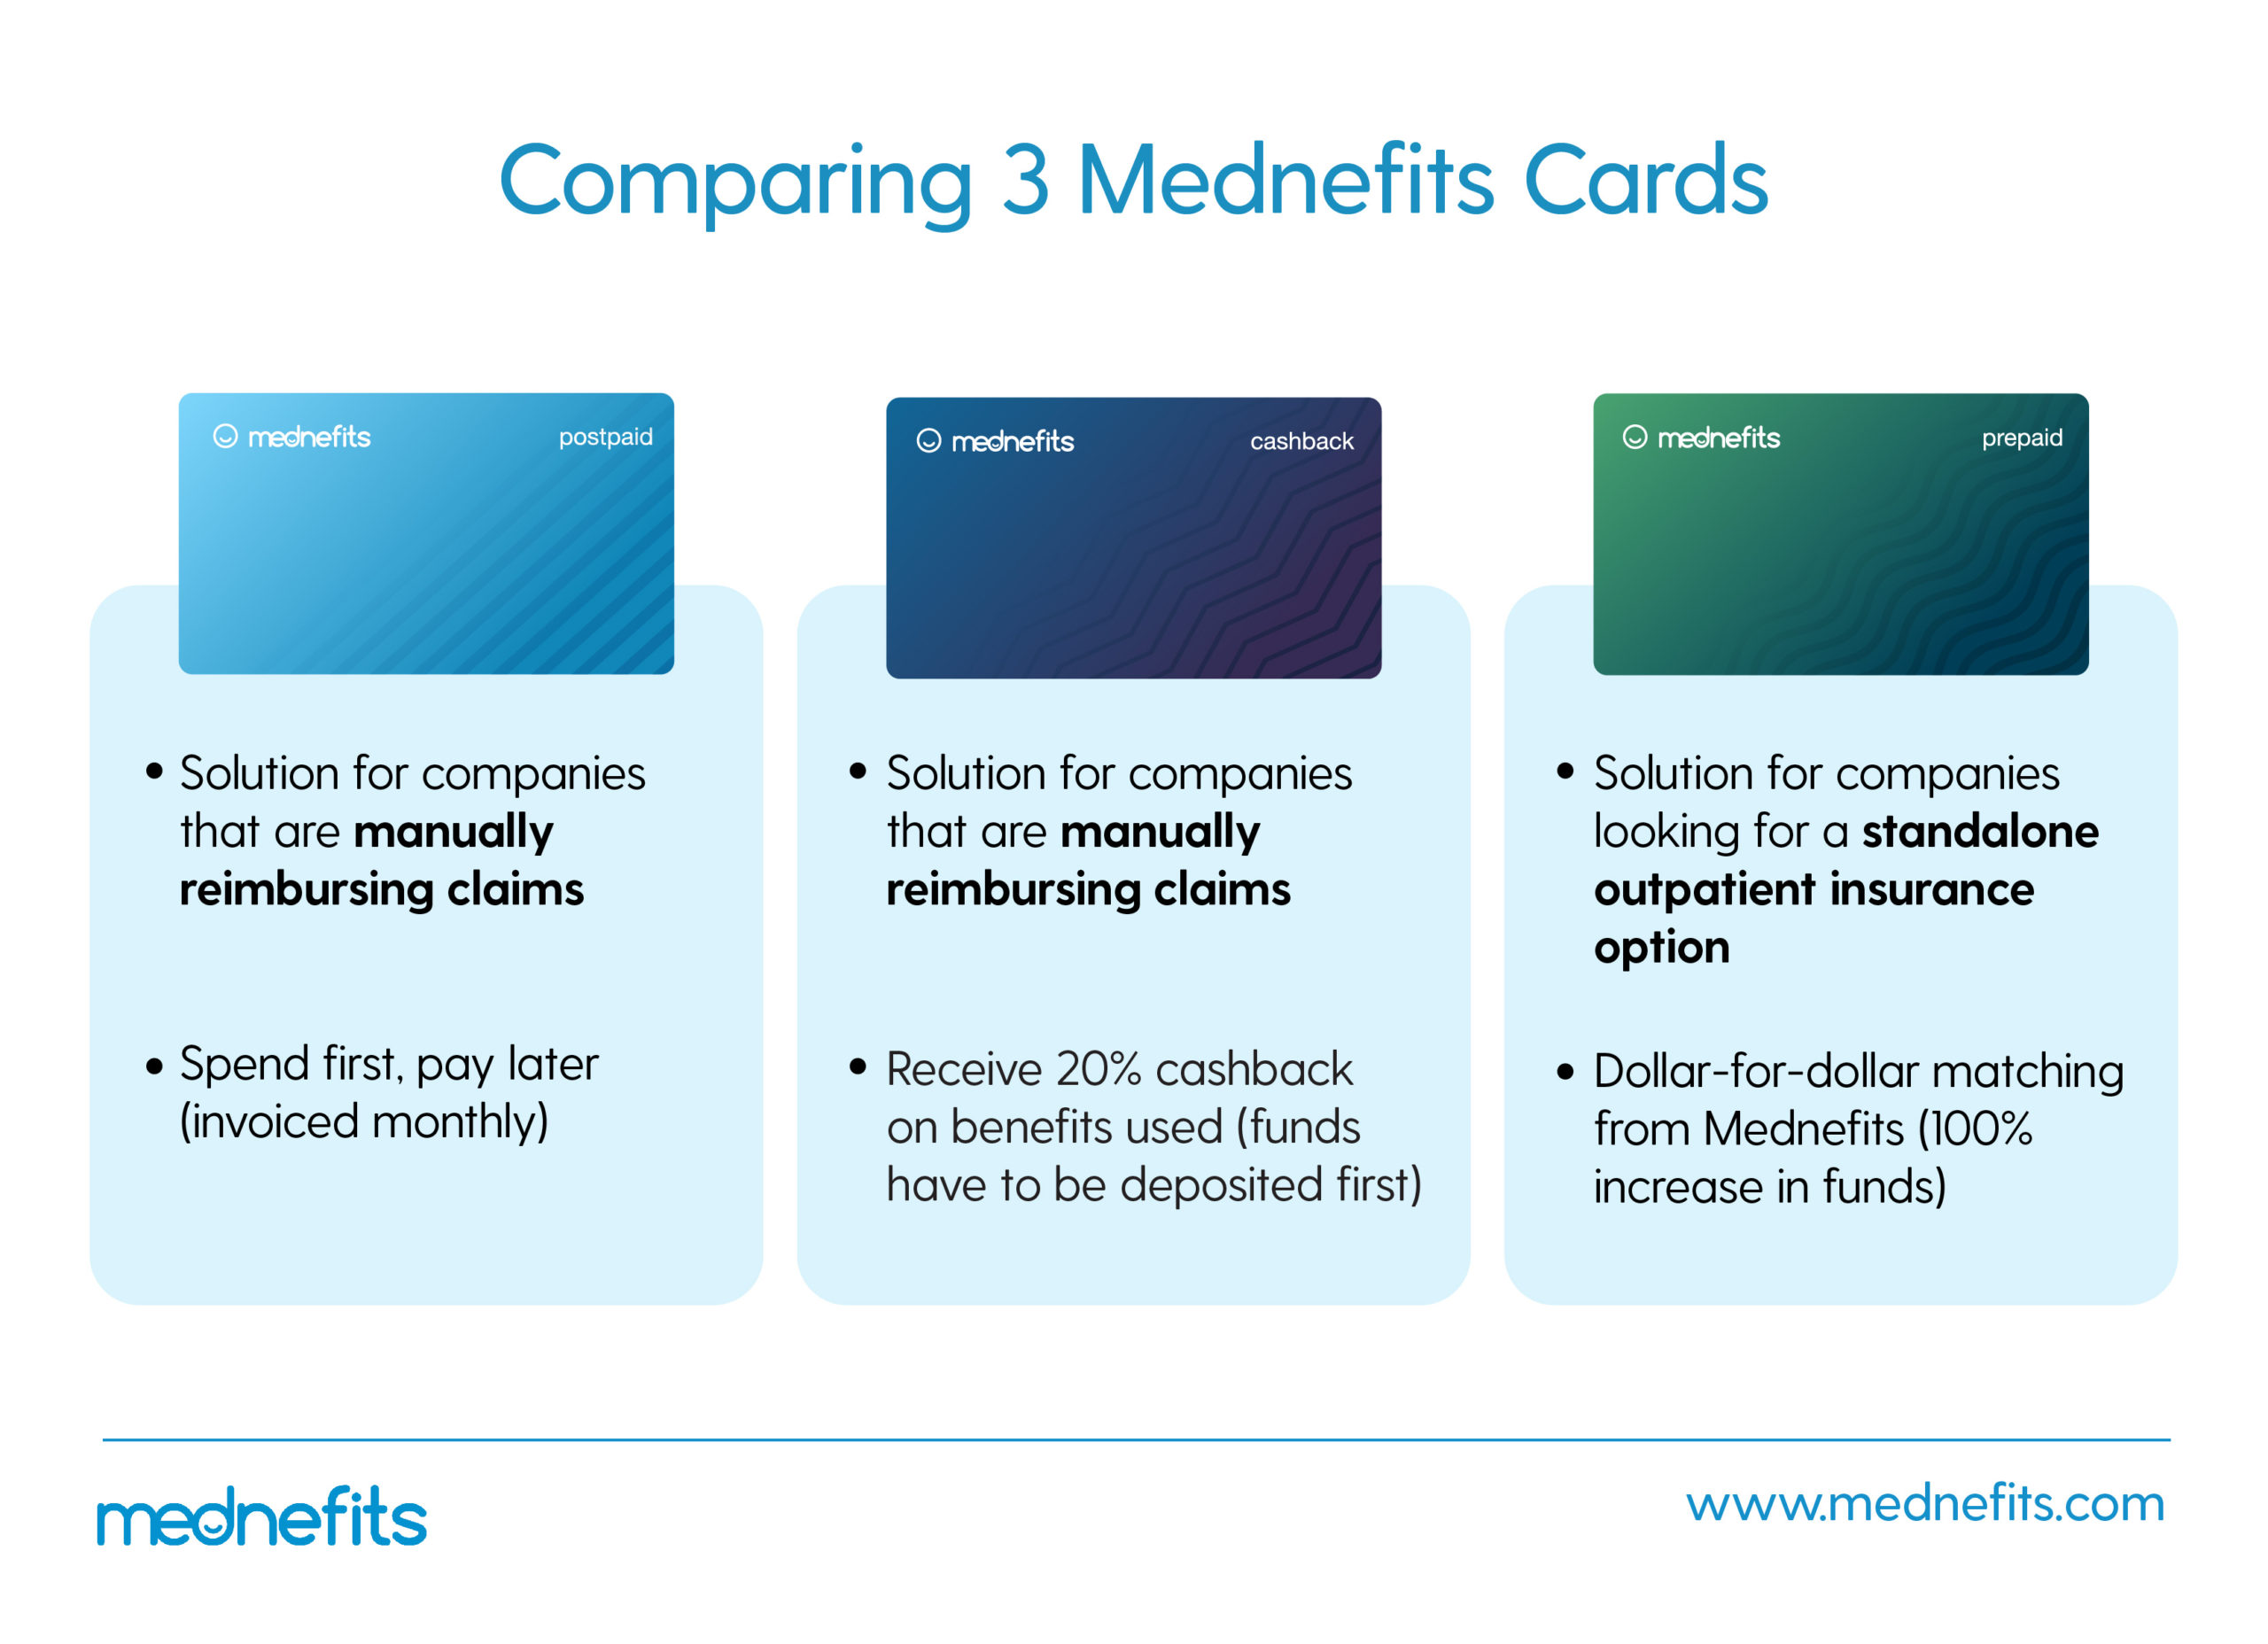 Corporate benefits just got more exciting: Introducing Mednefits Cards